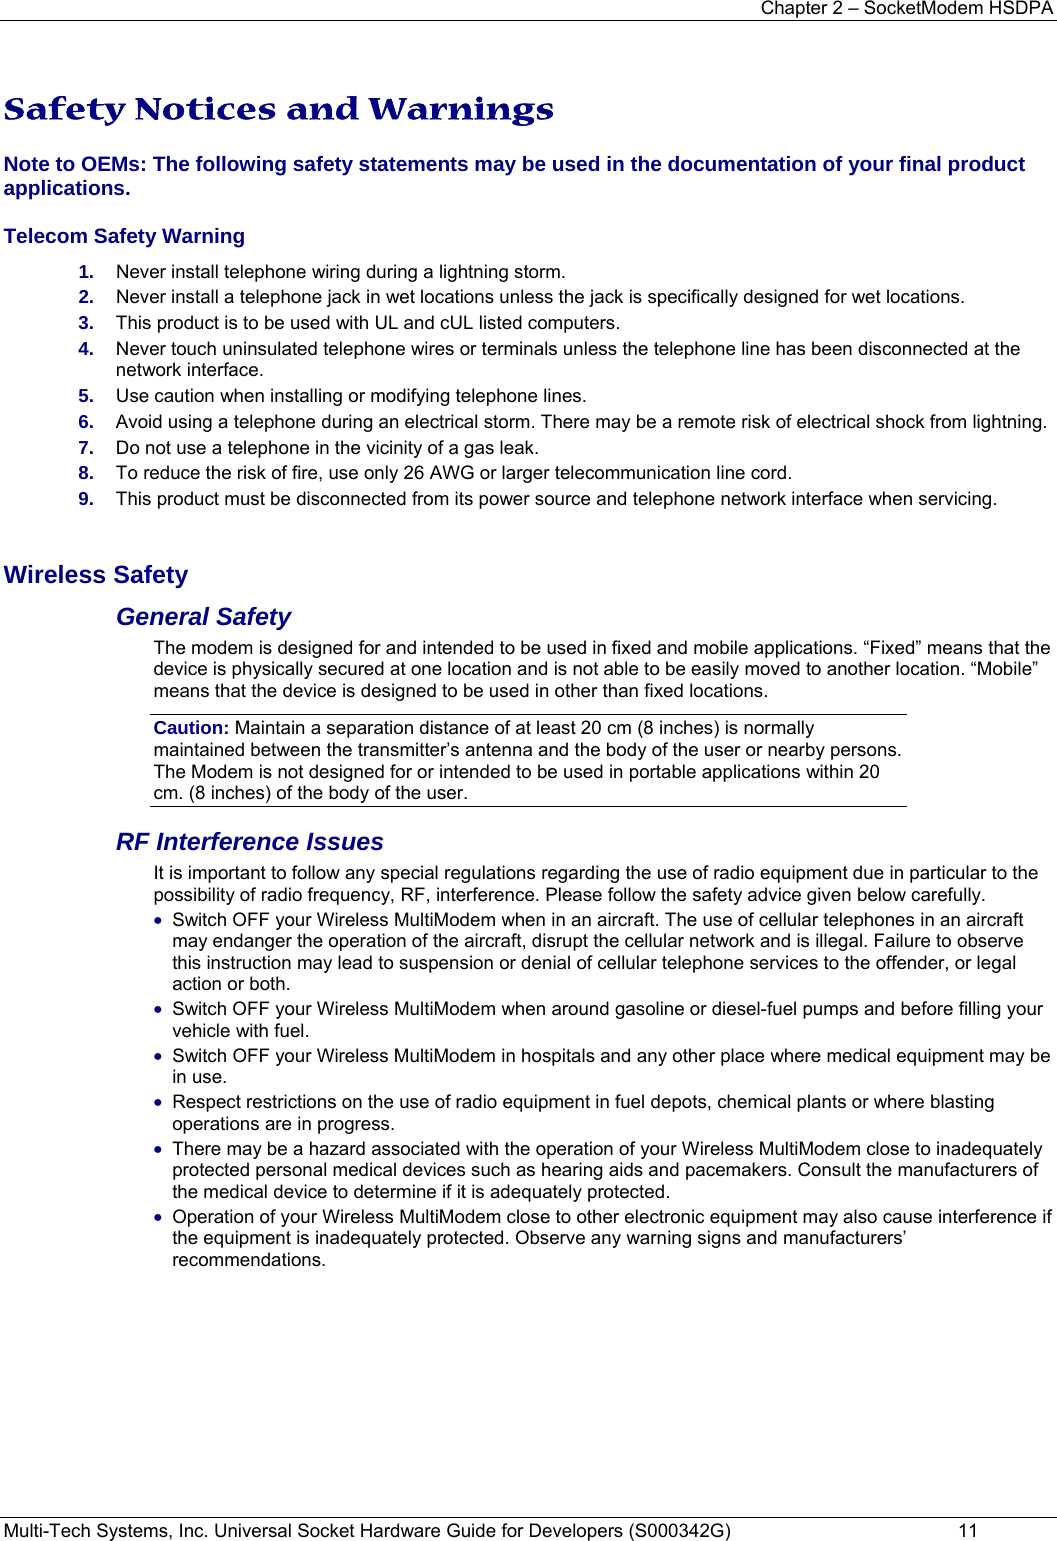 Chapter 2 – SocketModem HSDPA Multi-Tech Systems, Inc. Universal Socket Hardware Guide for Developers (S000342G)  11  Safety Notices and Warnings Note to OEMs: The following safety statements may be used in the documentation of your final product applications.  Telecom Safety Warning  1.  Never install telephone wiring during a lightning storm. 2.  Never install a telephone jack in wet locations unless the jack is specifically designed for wet locations. 3.  This product is to be used with UL and cUL listed computers. 4.  Never touch uninsulated telephone wires or terminals unless the telephone line has been disconnected at the network interface. 5.  Use caution when installing or modifying telephone lines. 6.  Avoid using a telephone during an electrical storm. There may be a remote risk of electrical shock from lightning. 7.  Do not use a telephone in the vicinity of a gas leak. 8.  To reduce the risk of fire, use only 26 AWG or larger telecommunication line cord. 9.  This product must be disconnected from its power source and telephone network interface when servicing.  Wireless Safety  General Safety The modem is designed for and intended to be used in fixed and mobile applications. “Fixed” means that the device is physically secured at one location and is not able to be easily moved to another location. “Mobile” means that the device is designed to be used in other than fixed locations. Caution: Maintain a separation distance of at least 20 cm (8 inches) is normally maintained between the transmitter’s antenna and the body of the user or nearby persons. The Modem is not designed for or intended to be used in portable applications within 20 cm. (8 inches) of the body of the user. RF Interference Issues It is important to follow any special regulations regarding the use of radio equipment due in particular to the possibility of radio frequency, RF, interference. Please follow the safety advice given below carefully. • Switch OFF your Wireless MultiModem when in an aircraft. The use of cellular telephones in an aircraft may endanger the operation of the aircraft, disrupt the cellular network and is illegal. Failure to observe this instruction may lead to suspension or denial of cellular telephone services to the offender, or legal action or both. • Switch OFF your Wireless MultiModem when around gasoline or diesel-fuel pumps and before filling your vehicle with fuel. • Switch OFF your Wireless MultiModem in hospitals and any other place where medical equipment may be in use. • Respect restrictions on the use of radio equipment in fuel depots, chemical plants or where blasting operations are in progress. • There may be a hazard associated with the operation of your Wireless MultiModem close to inadequately protected personal medical devices such as hearing aids and pacemakers. Consult the manufacturers of the medical device to determine if it is adequately protected. • Operation of your Wireless MultiModem close to other electronic equipment may also cause interference if the equipment is inadequately protected. Observe any warning signs and manufacturers’ recommendations. 